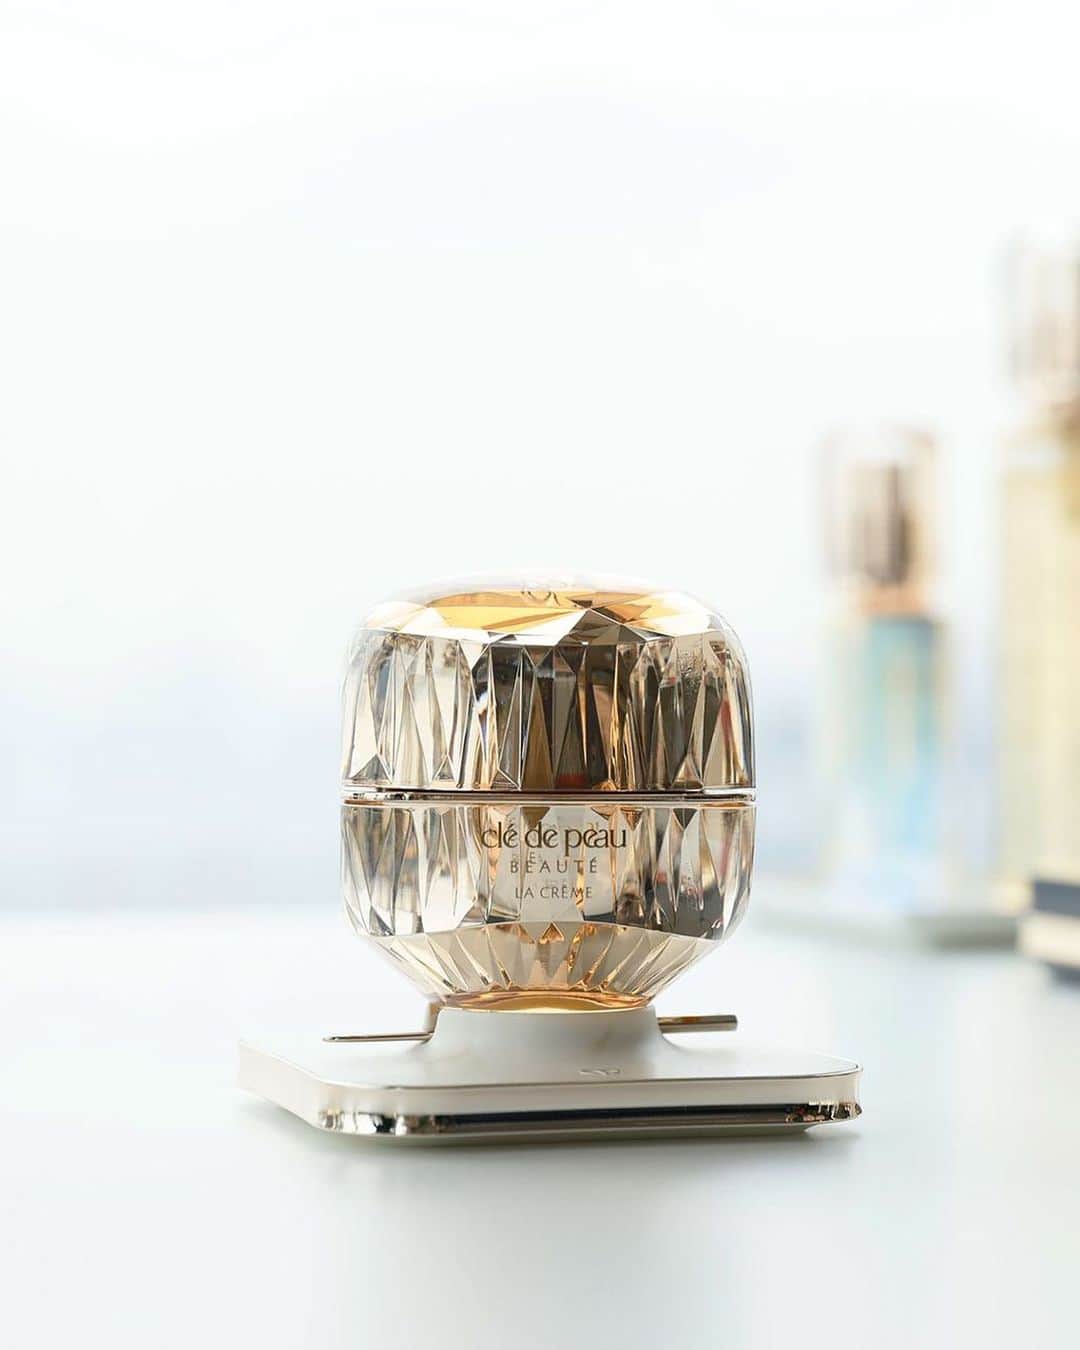 Clé de Peau Beauté Officialのインスタグラム：「As you wind down in the evening, it's the perfect time to indulge in some self-care, and that means taking time for your night-time routine. The final and most important step of the evening skincare ritual is #LaCreme, designed to amplify #SkinIntelligence and support your skin’s ability to repair, renew and protect itself overnight.   Step 1: Take a pearl-sized amount of La Crème with a spatula and smooth the product over your skin Step 2: Press your palms against your cheeks and gently glide your hands from the chin to the temples.  Step 3: Repeat three times.   With La Crème in your daily skincare routine,  you’re sure to wake up every morning to bright, beautiful and absolutely radiant skin ✨  夜のスキンケアは、セルフケアに最適な時間です。 夜のスキンケア習慣の仕上げにして最も大切なステップは、クレ・ド・ポー ボーテ #ラクレーム （医薬部外品）で「肌の知性*」を輝かせること。ラ・クレームは夜の肌メカニズムに着目し、唯一無二の輝きで満たすハイパフォーマンスクリームです。  ステップ 1：夜のお手入れの最後に、スパチュラにパール粒 1 コ分を目安にとり、顔全体にていねいになじませます。 ステップ 2：手のひら全体を使い、ほおを包みこむようにして、あご先からこめかみまで持ち上げます ステップ 3：これを 3 回繰り返します。  ラ・クレームを毎日のスキンケアに取り入れることで、とろけるように肌へなじんで豊かなうるおいとはり・弾力をもたらし、若々しい印象があふれだす輝かしい未来へ導きます✨  *「肌の知性」とは、すべての人が生まれながらにそなえている、生涯美しい輝きを保ち続けるための鍵です。」